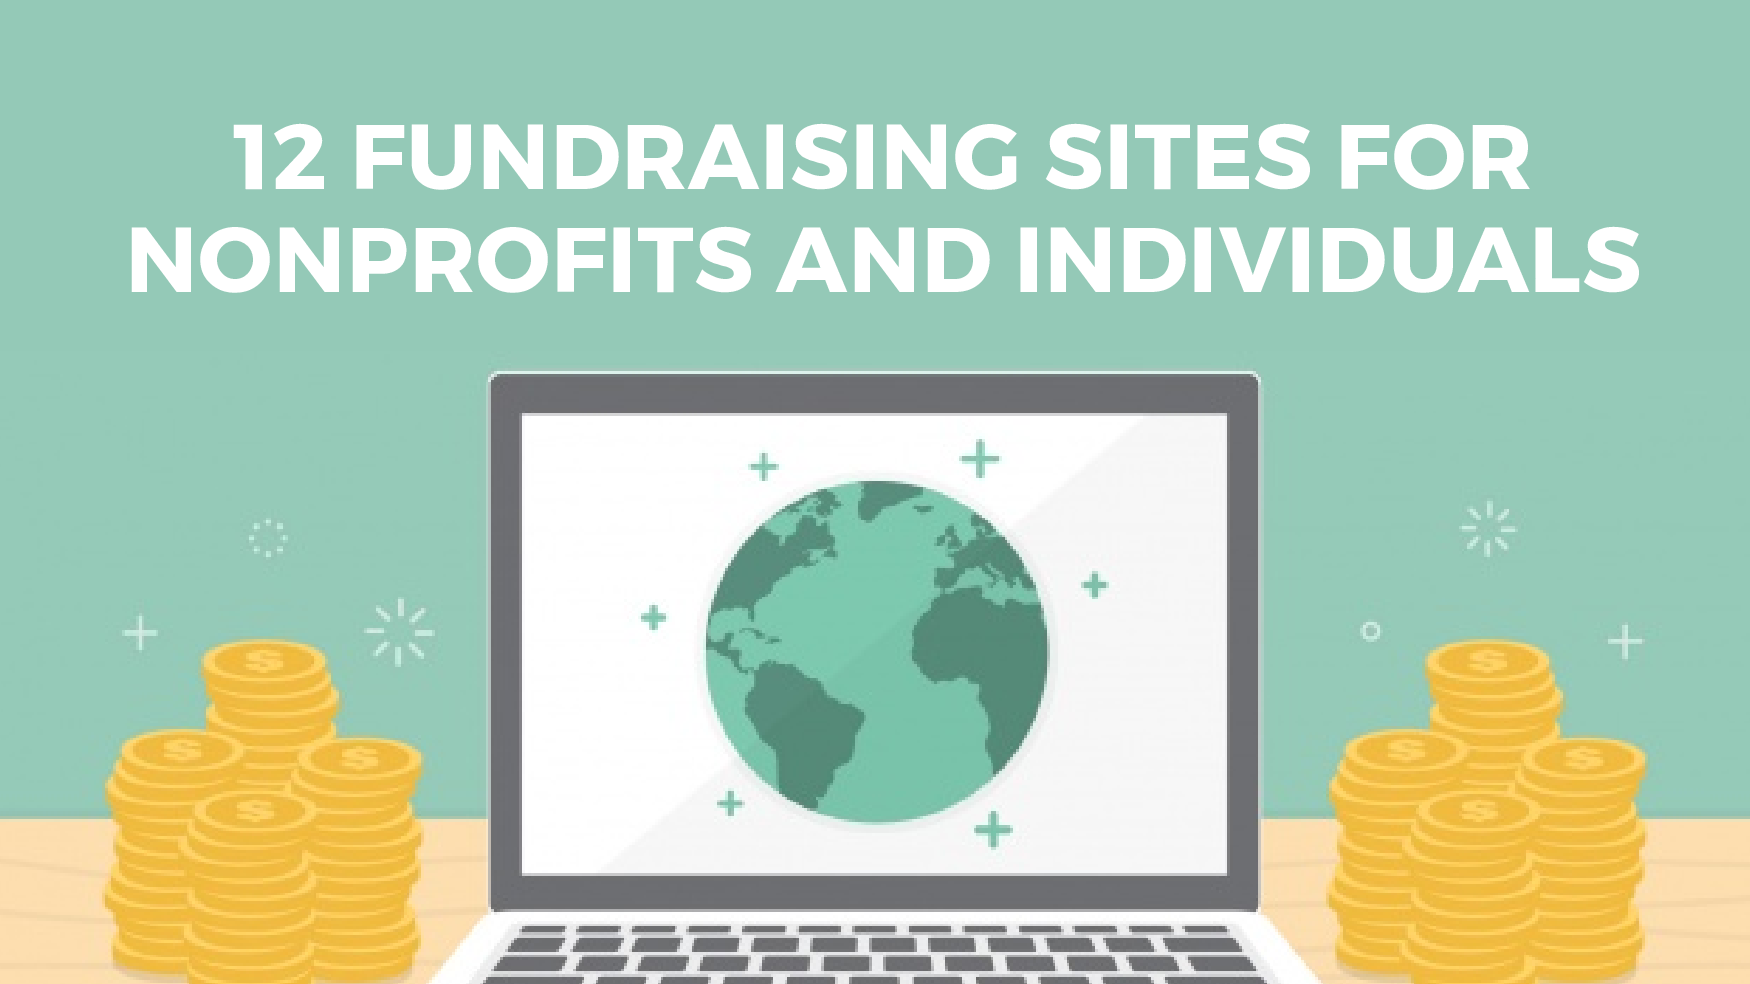 12 of the Best Fundraising Sites for Nonprofits and Individuals